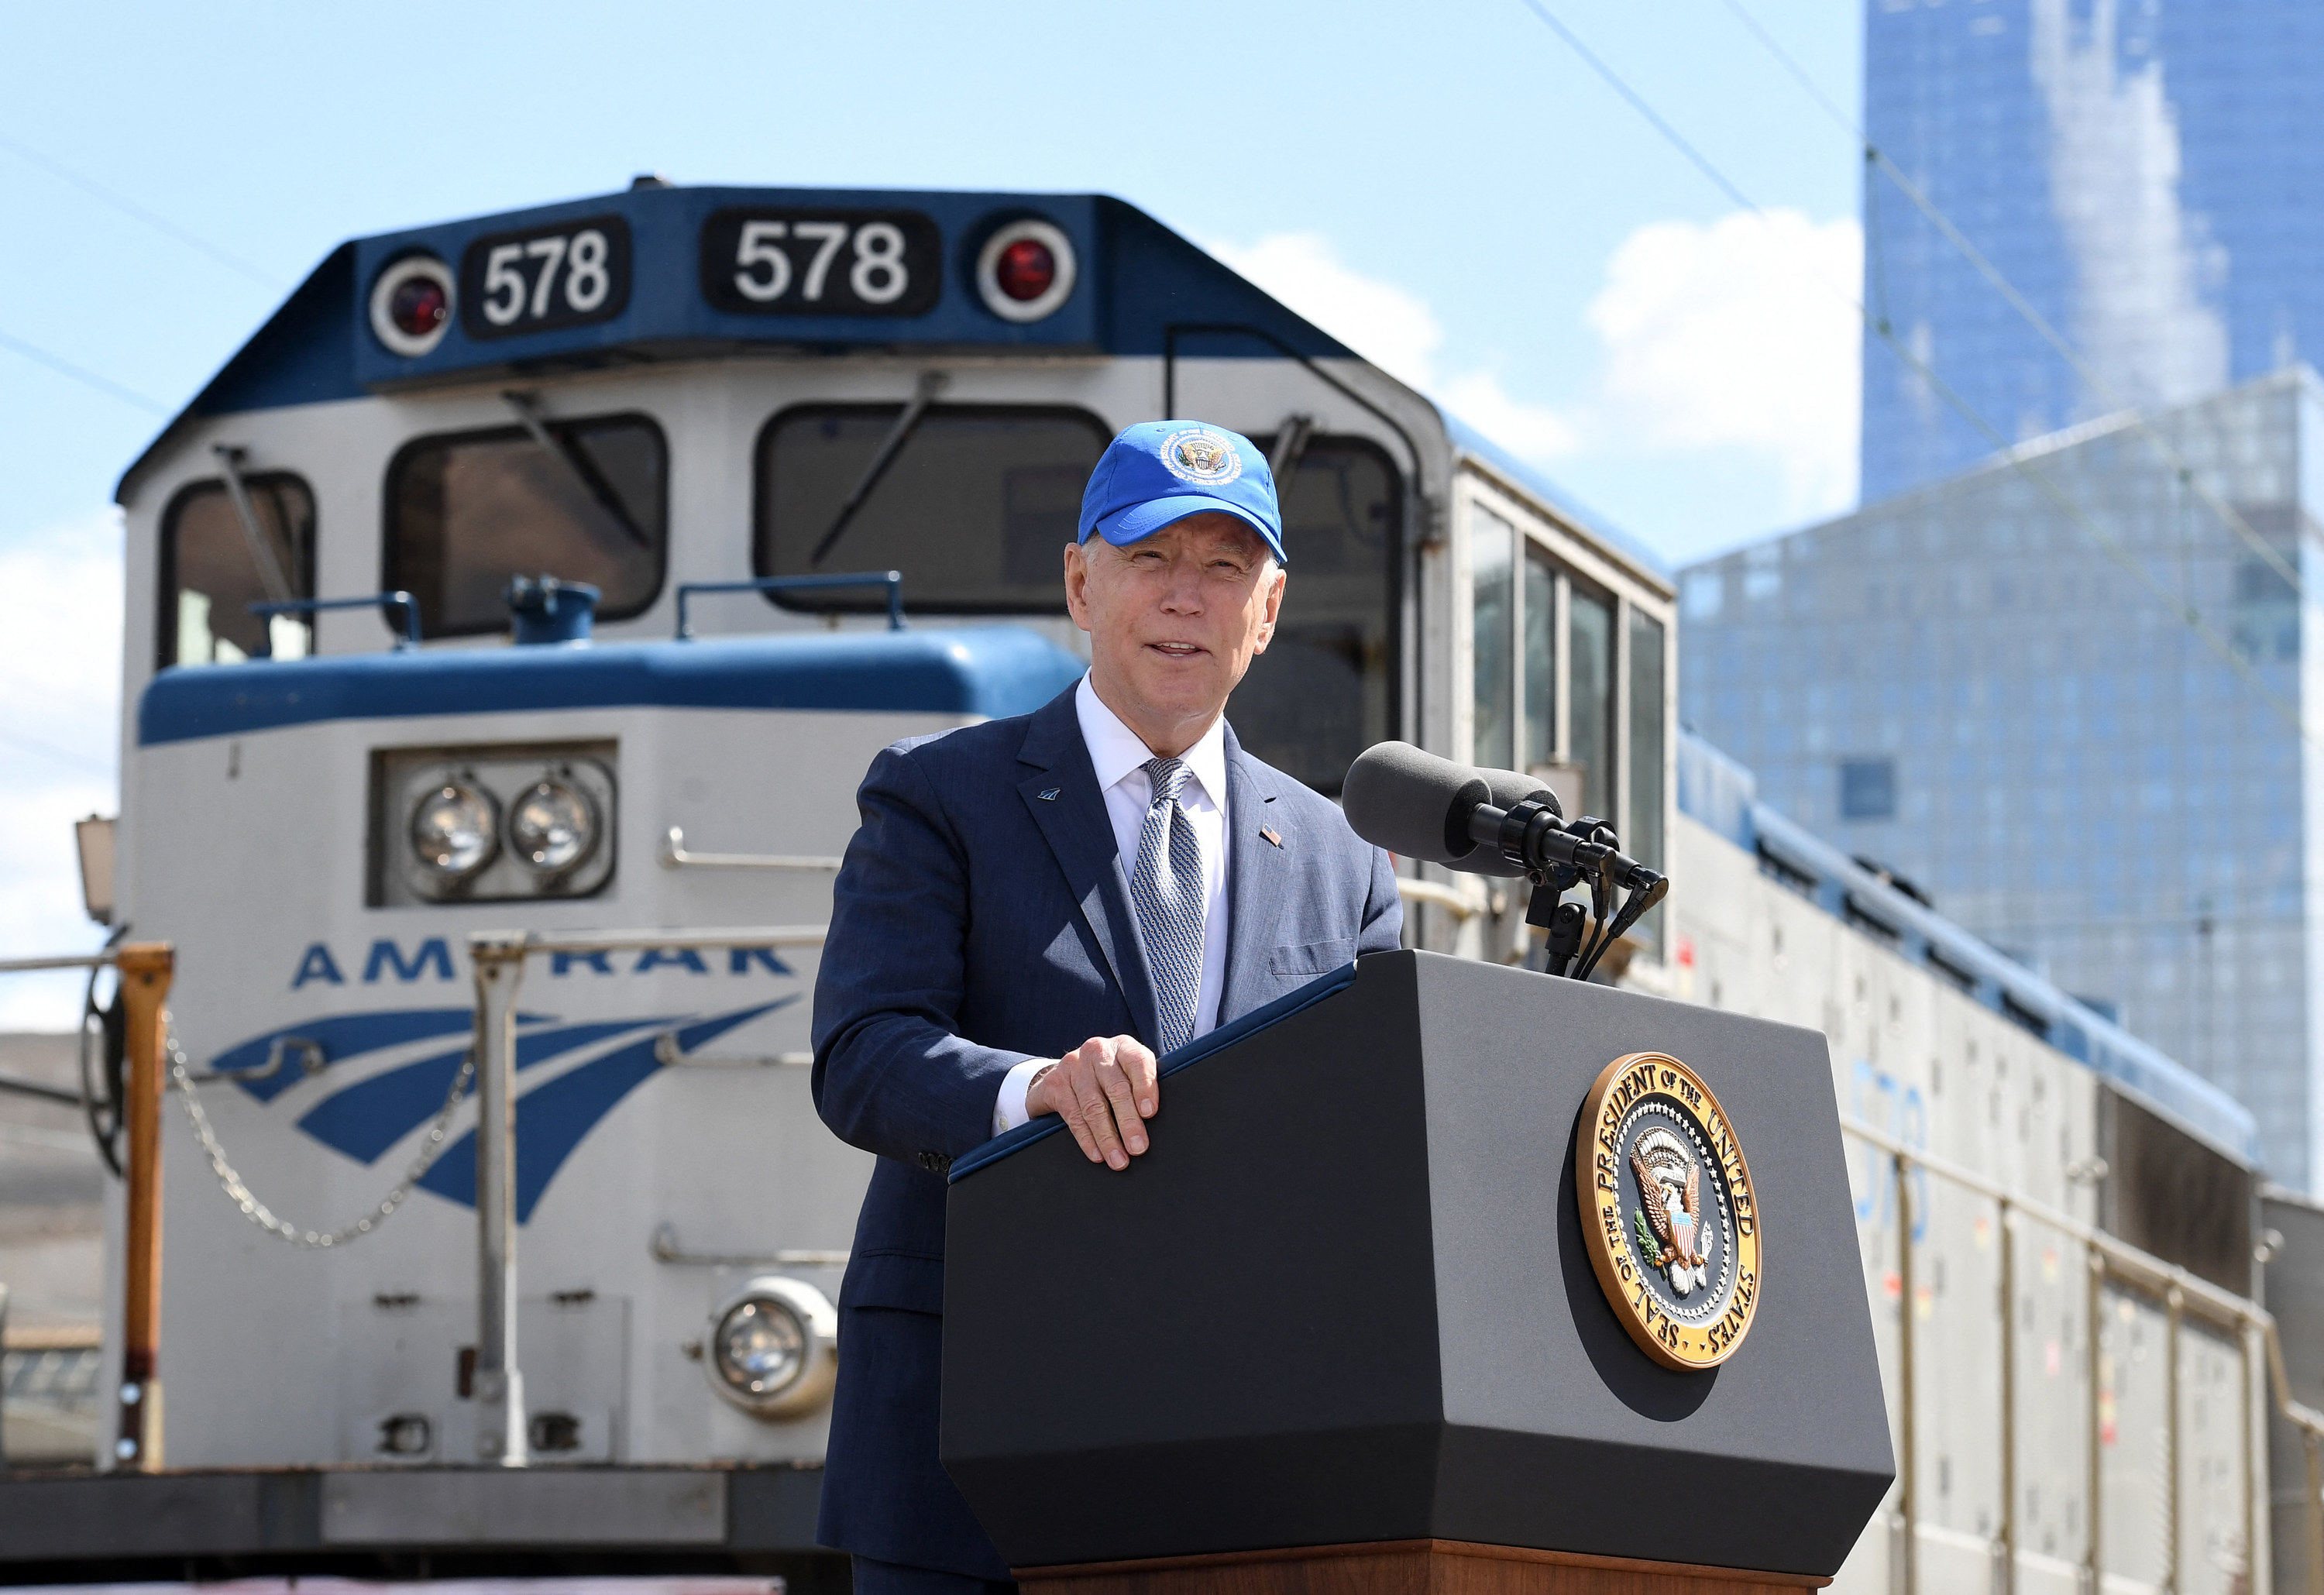 Biden speaks at a lectern in front of an Amtrak train